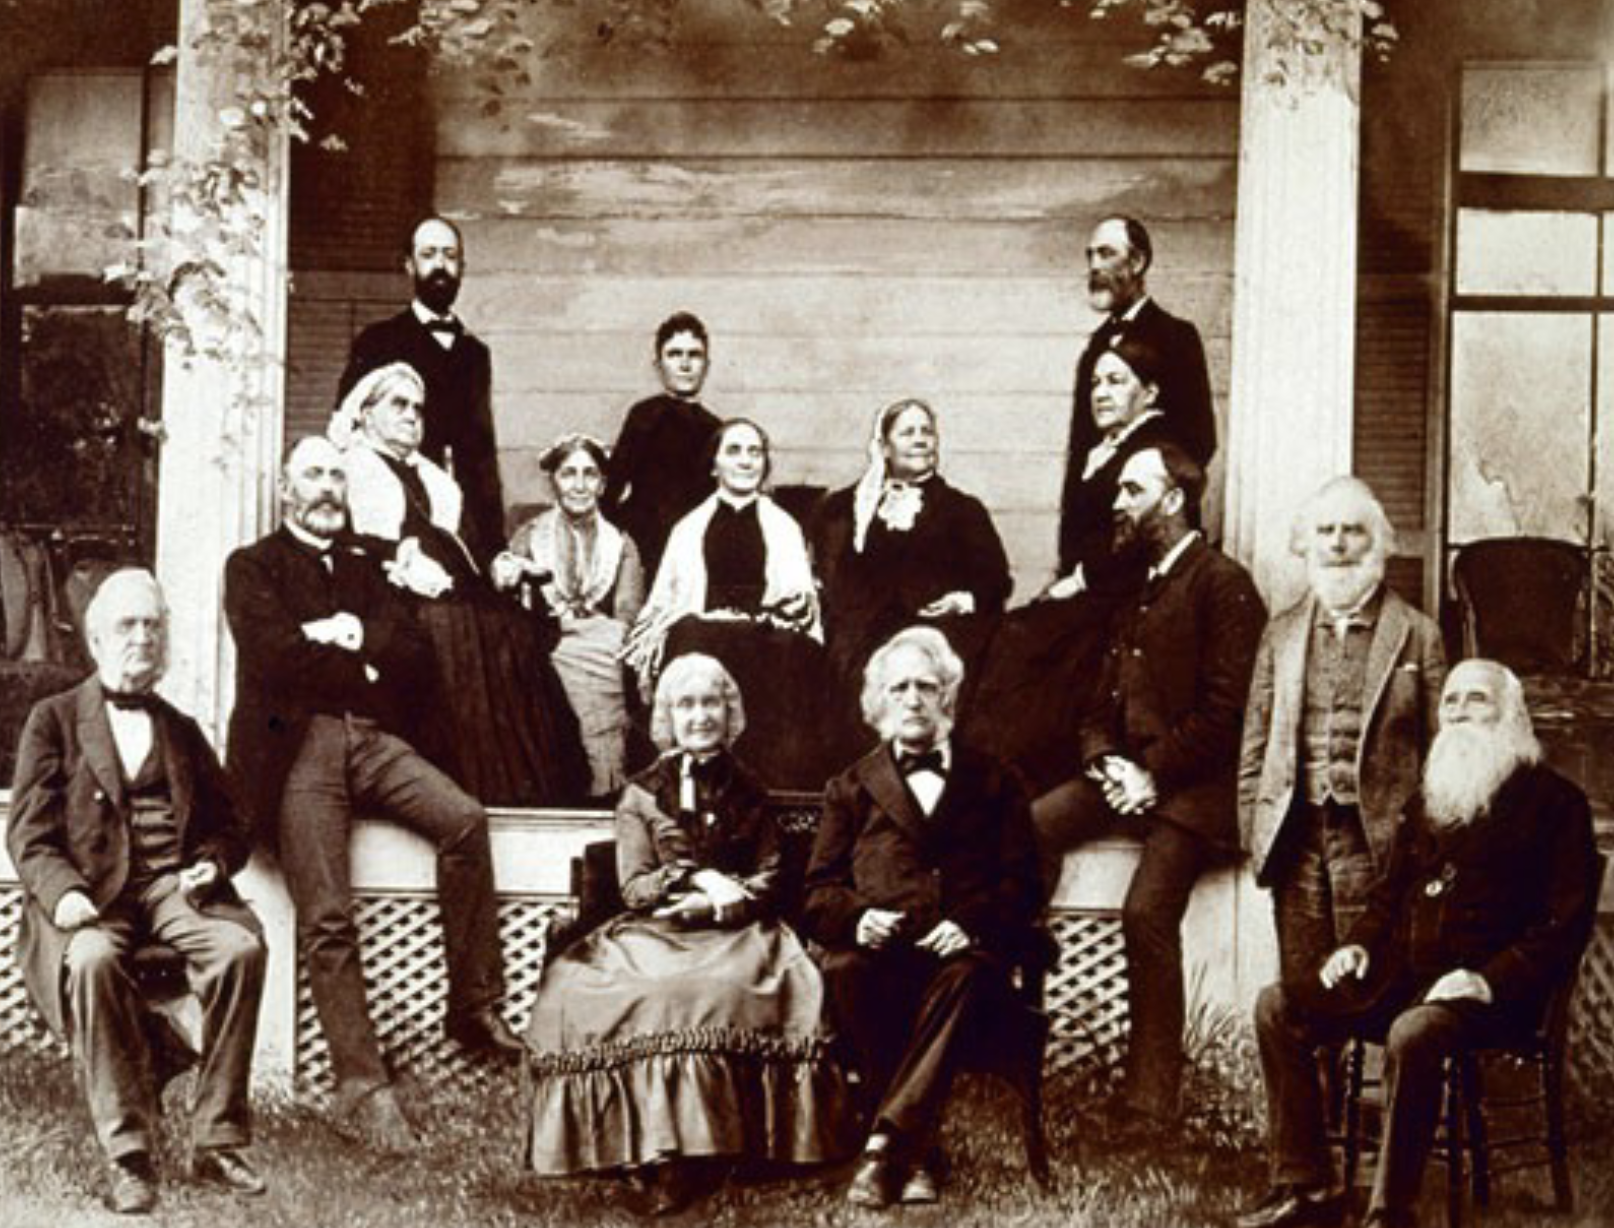 Group portrait of members of the New England Woman's Club, including both men and women, ca. 1870-1880.